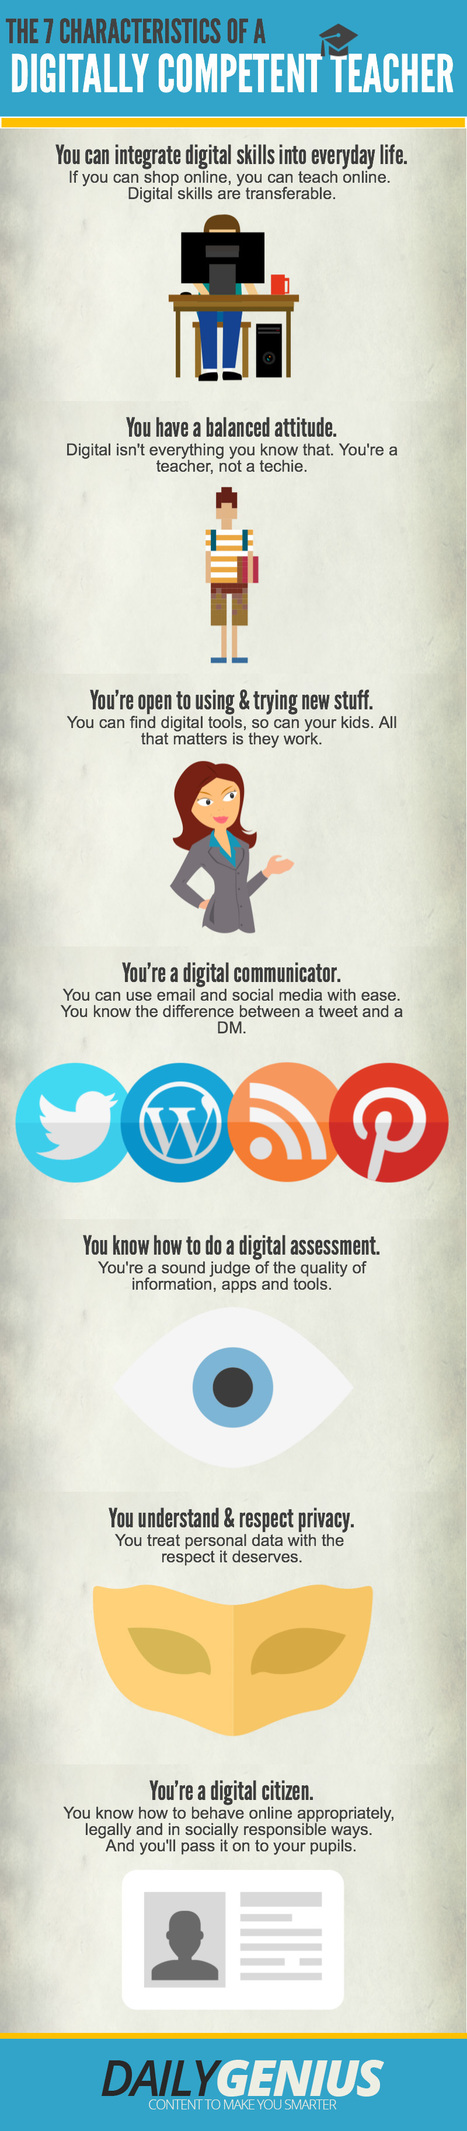 The Characteristics of a Digitally Competent Teacher Infographic | gpmt | Scoop.it